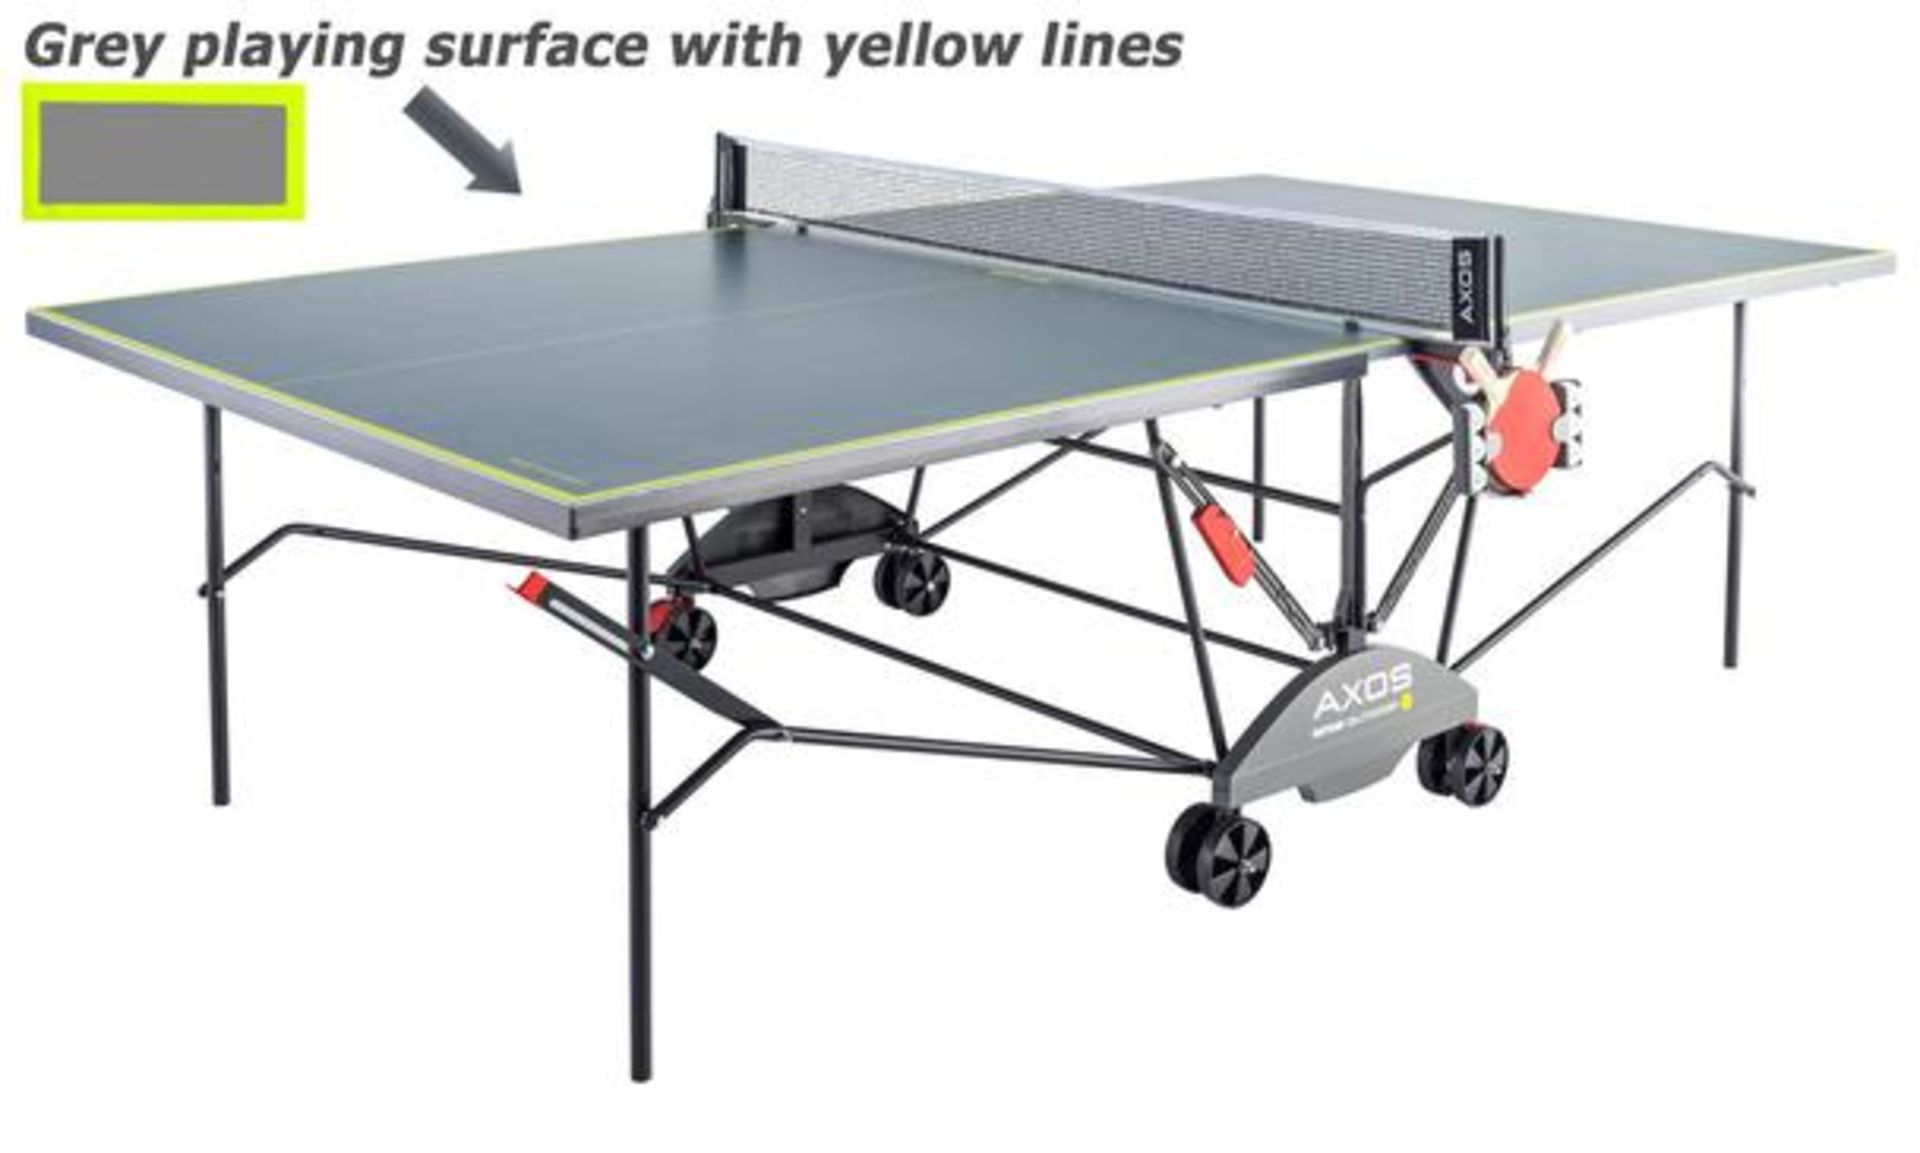 Kattler Axos Outdoor 3 table tennis table, appears to have all parts (no guarantee), half built